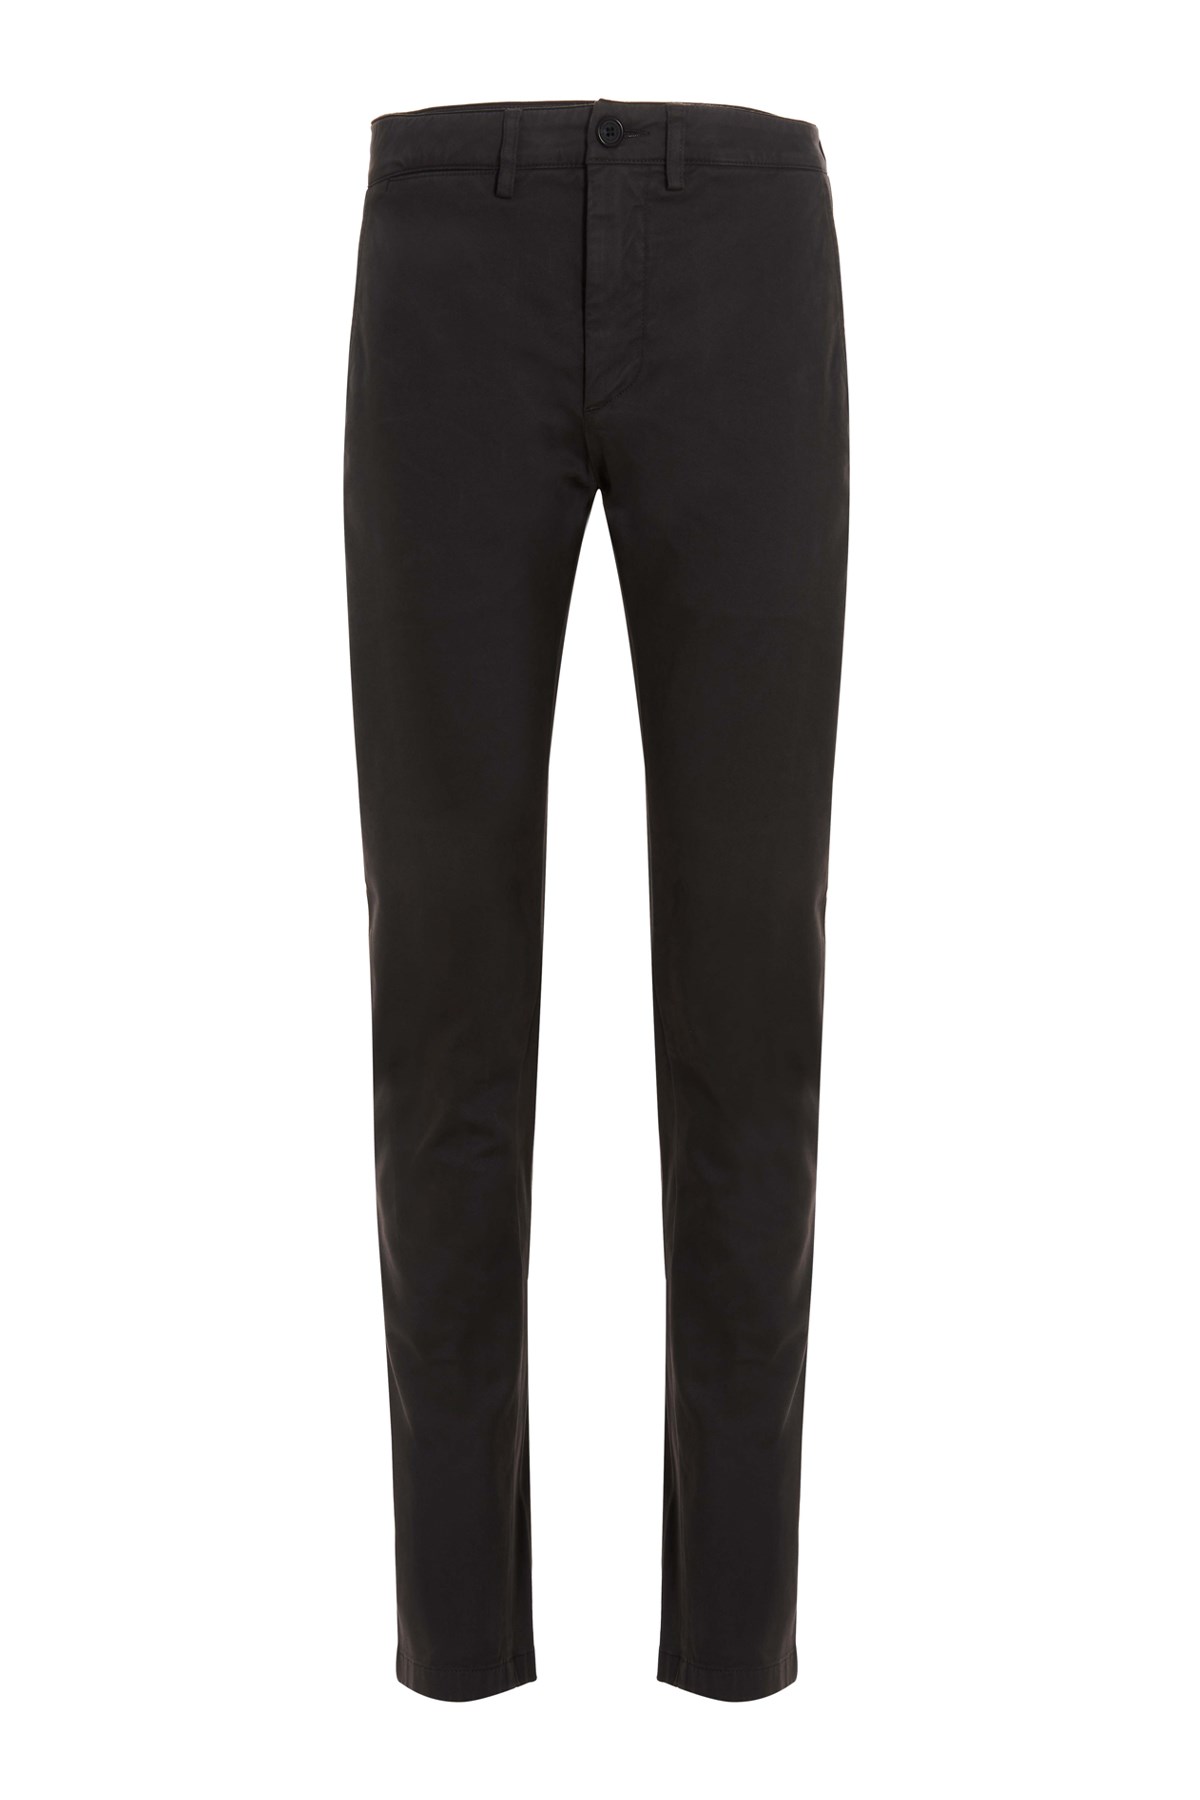 DEPARTMENT 5 ‘Mike' Trousers